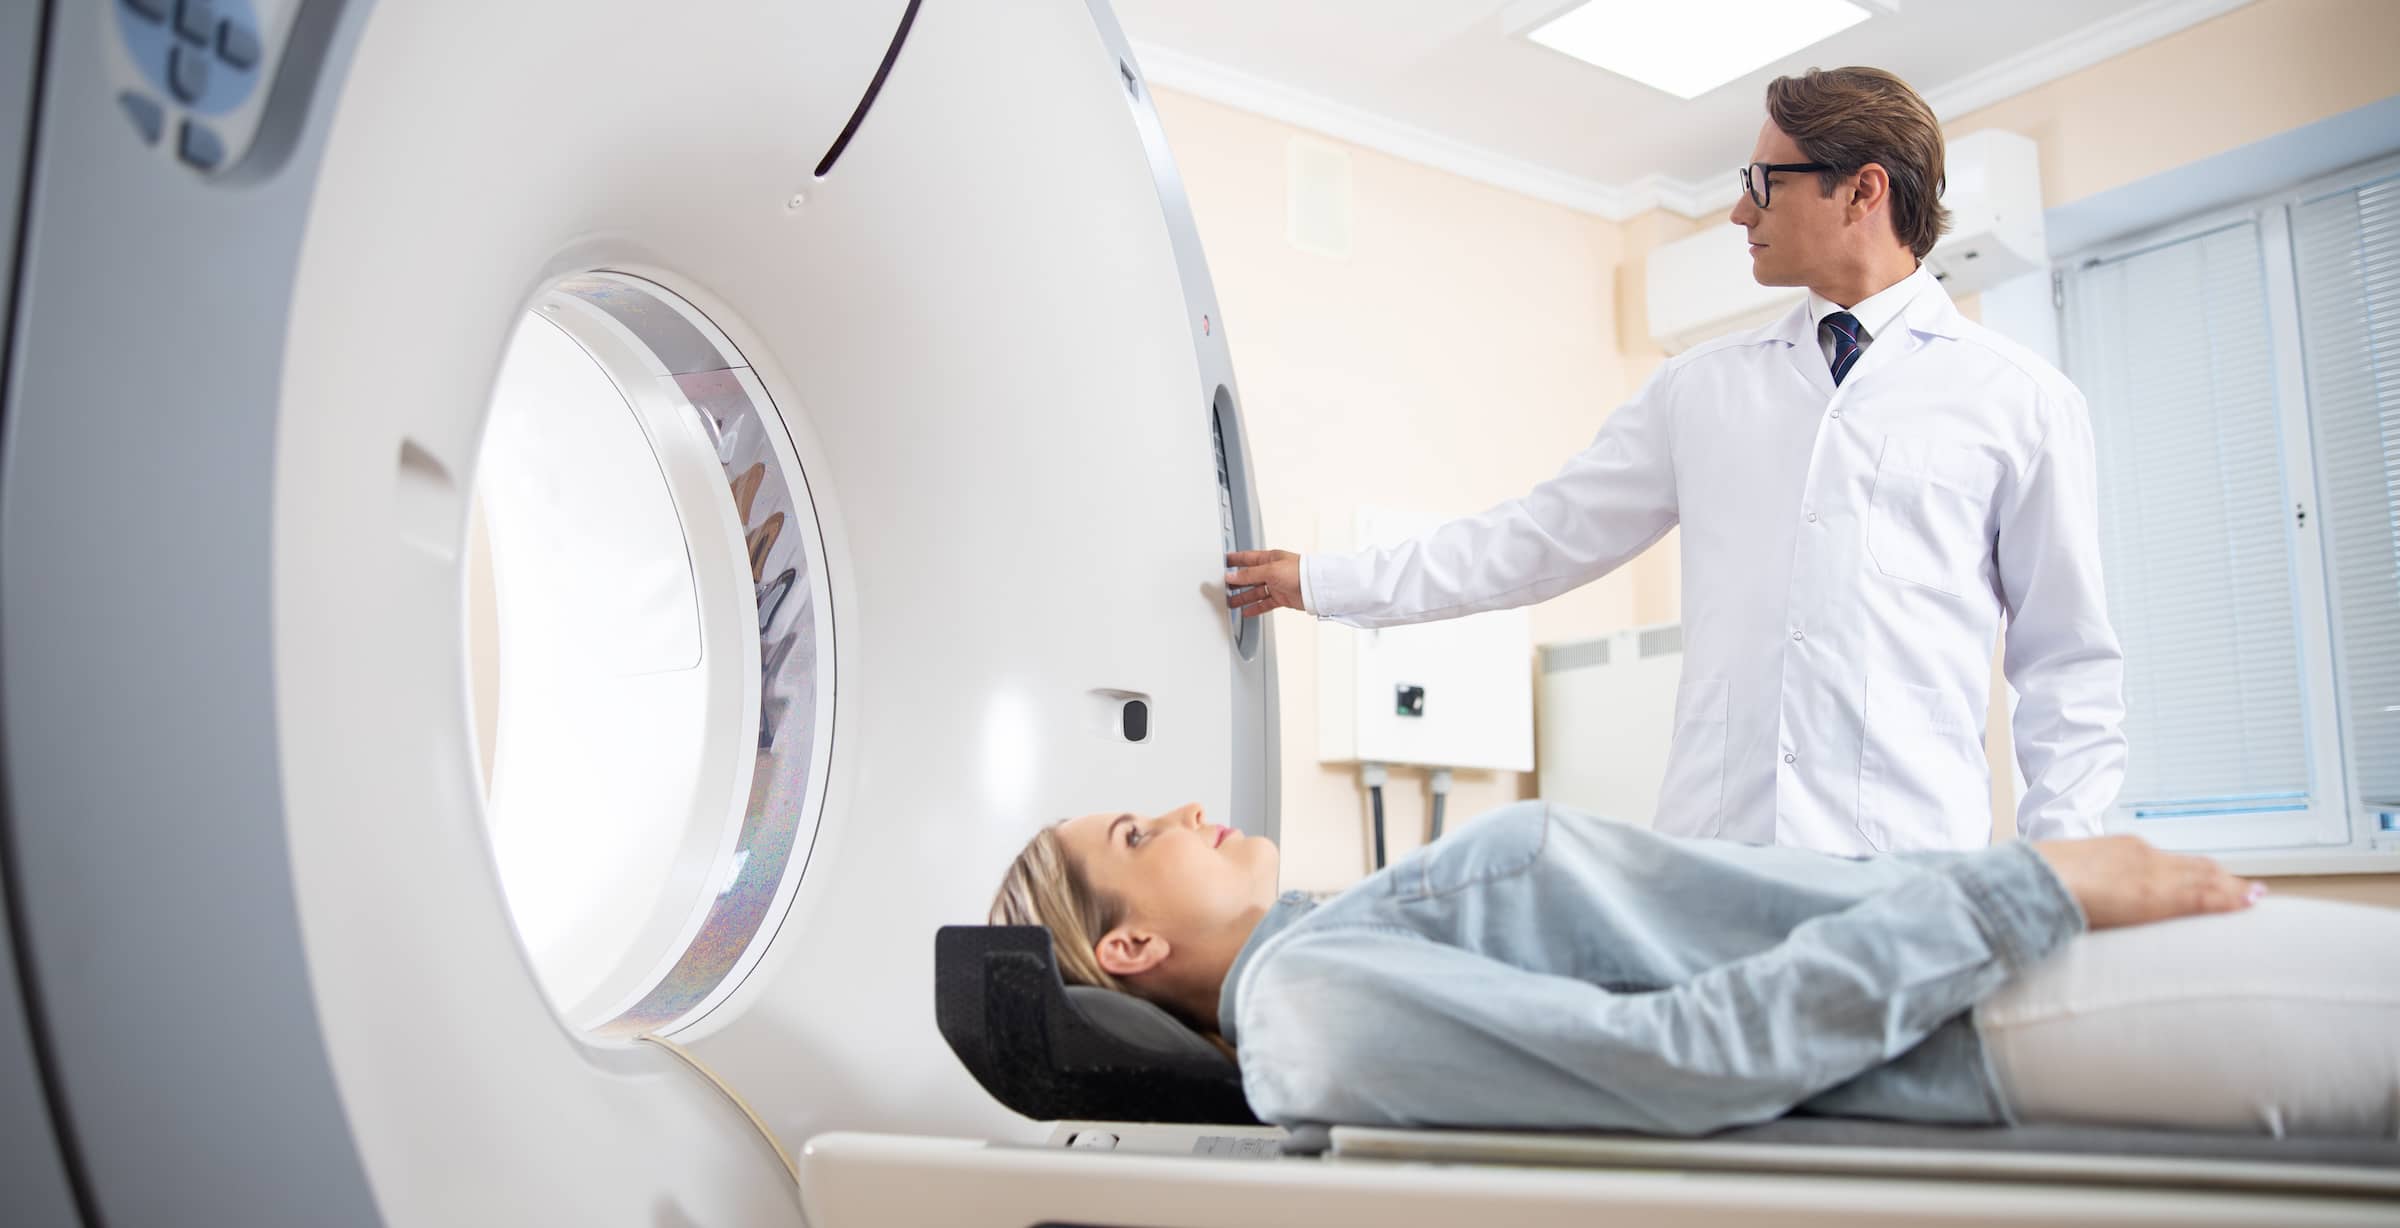 How to prepare for an mri scan